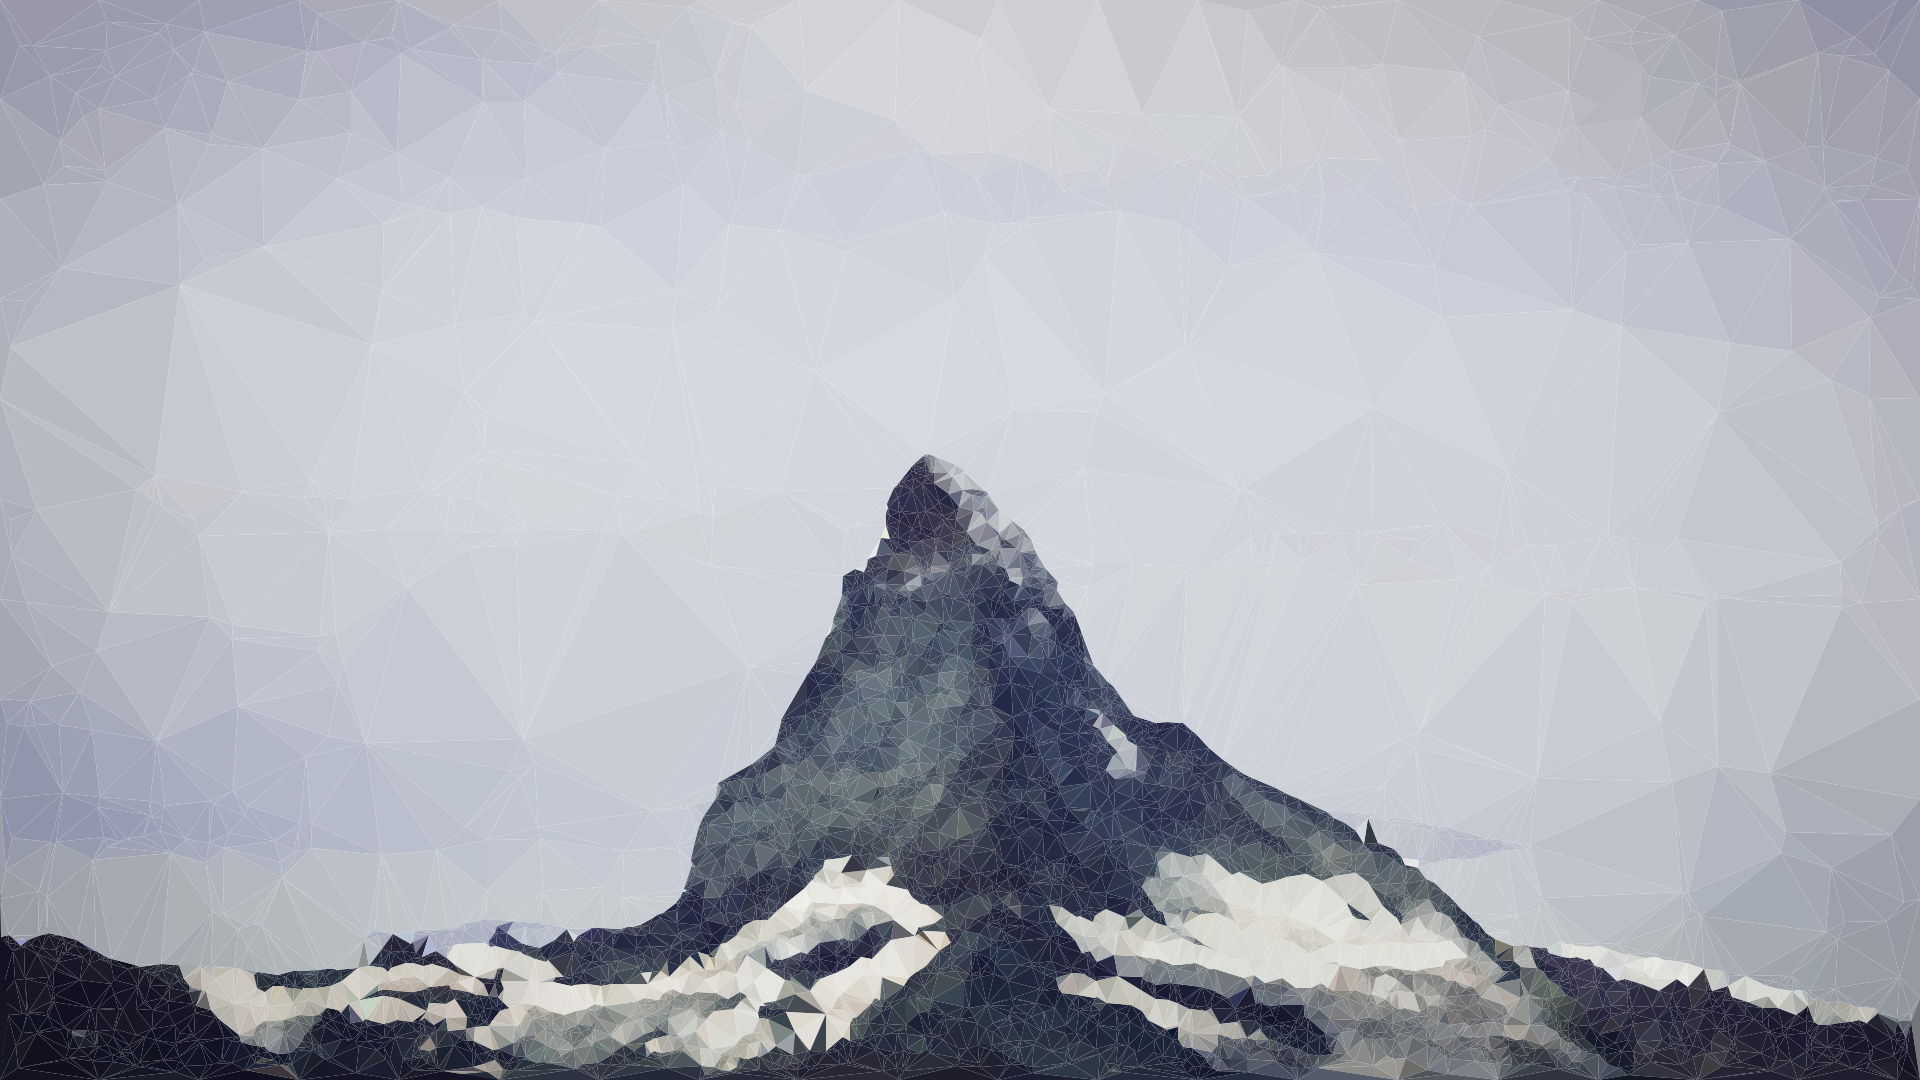 Geometry Low Poly Mountains Network 1920x1080